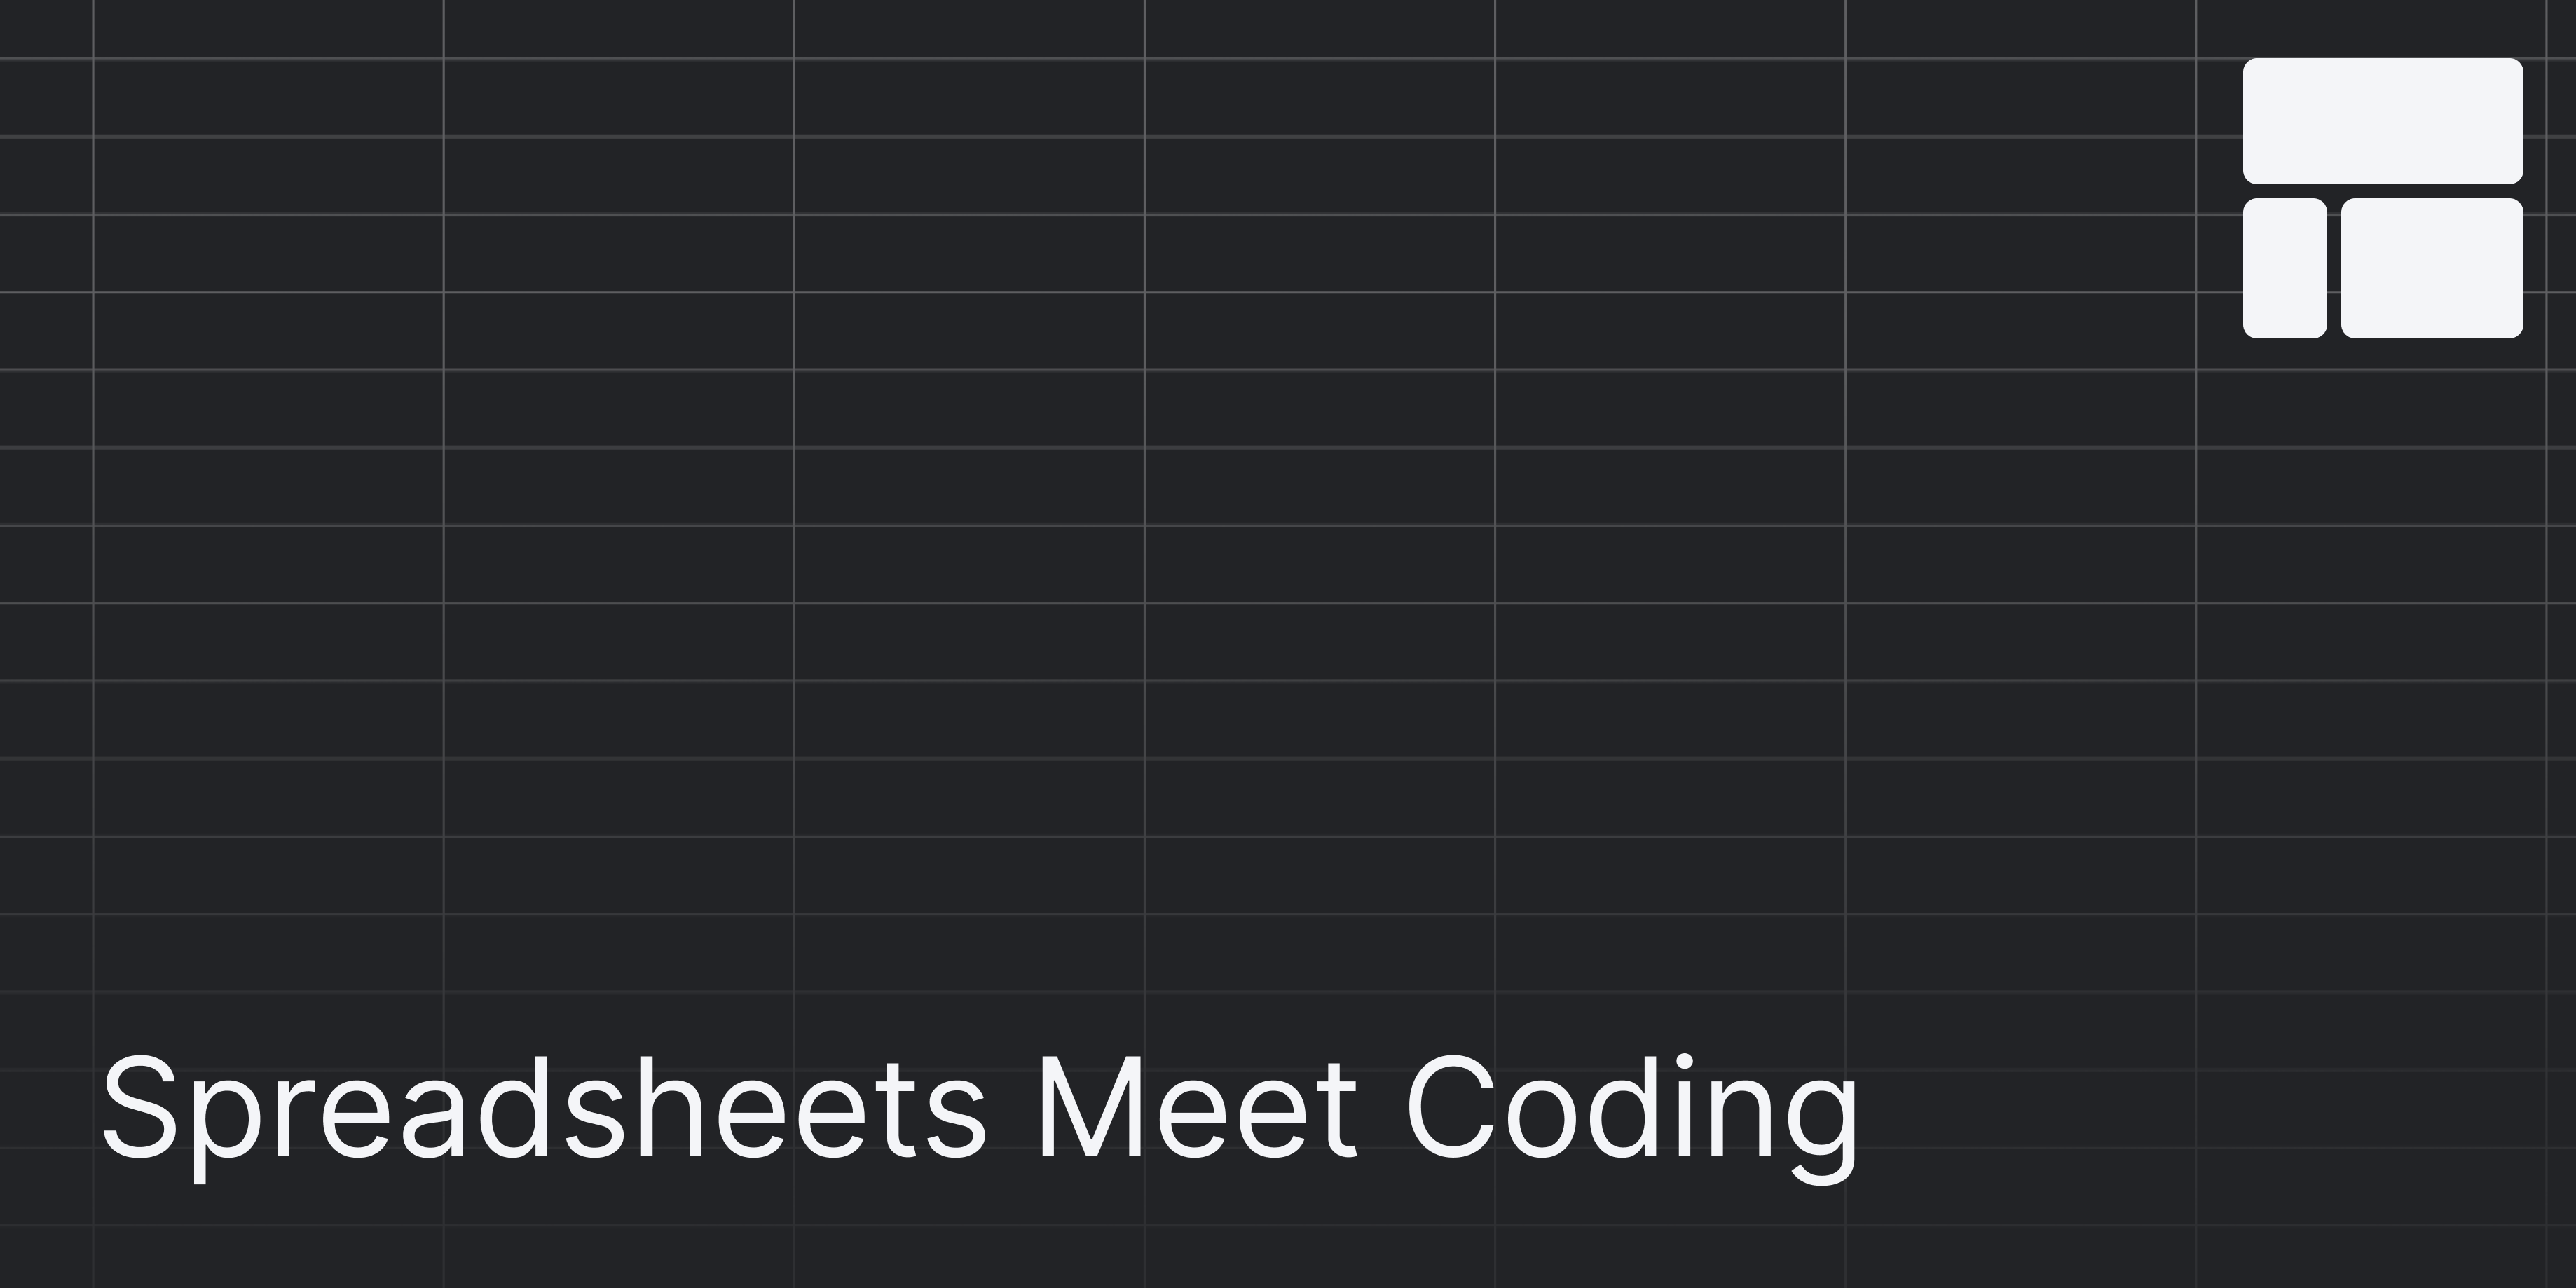 Cover Image for Spreadsheets Meet Coding